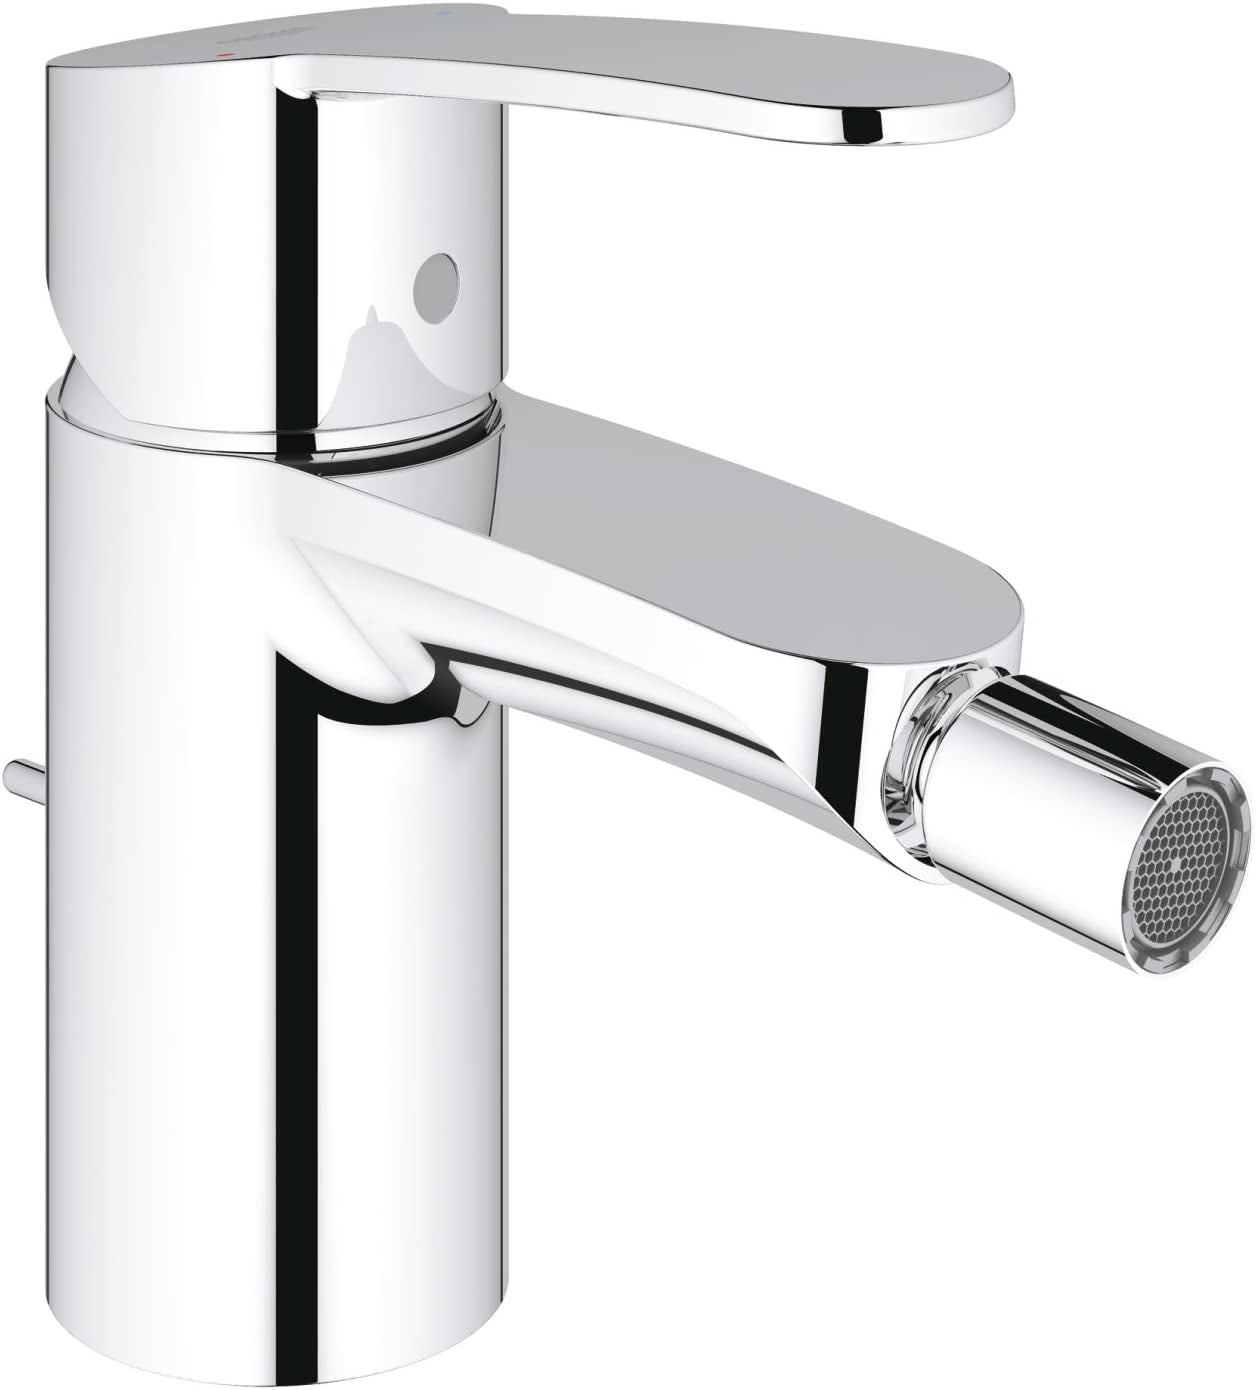 GROHE, GROHE 33565002 Eurostyle Cosmopolitan Bidet Tap (Pop-Up Waste and Standard Spout)